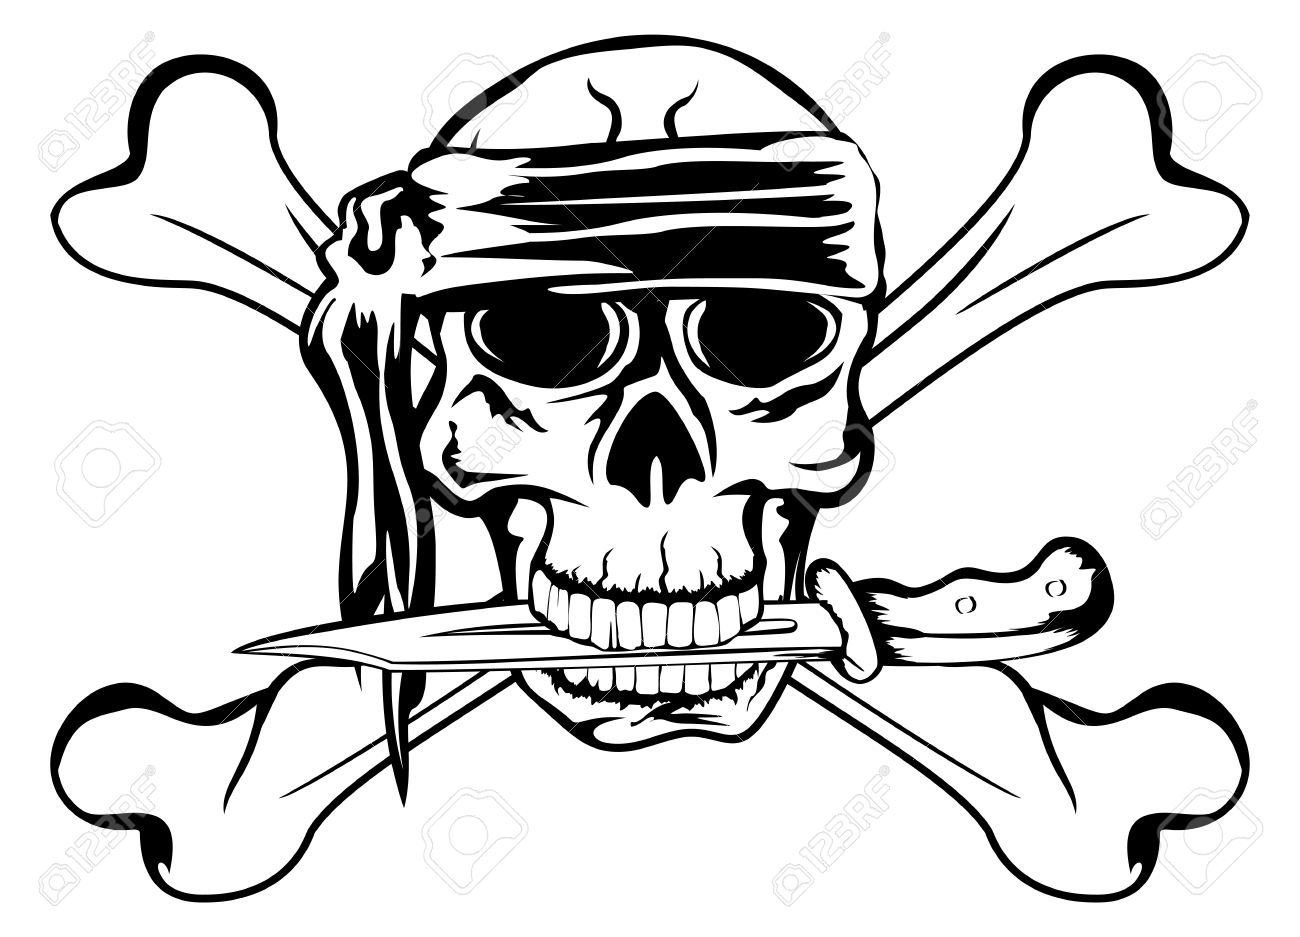 Black Pirate Skull With Crossbone With Knife Tattoo Stencil